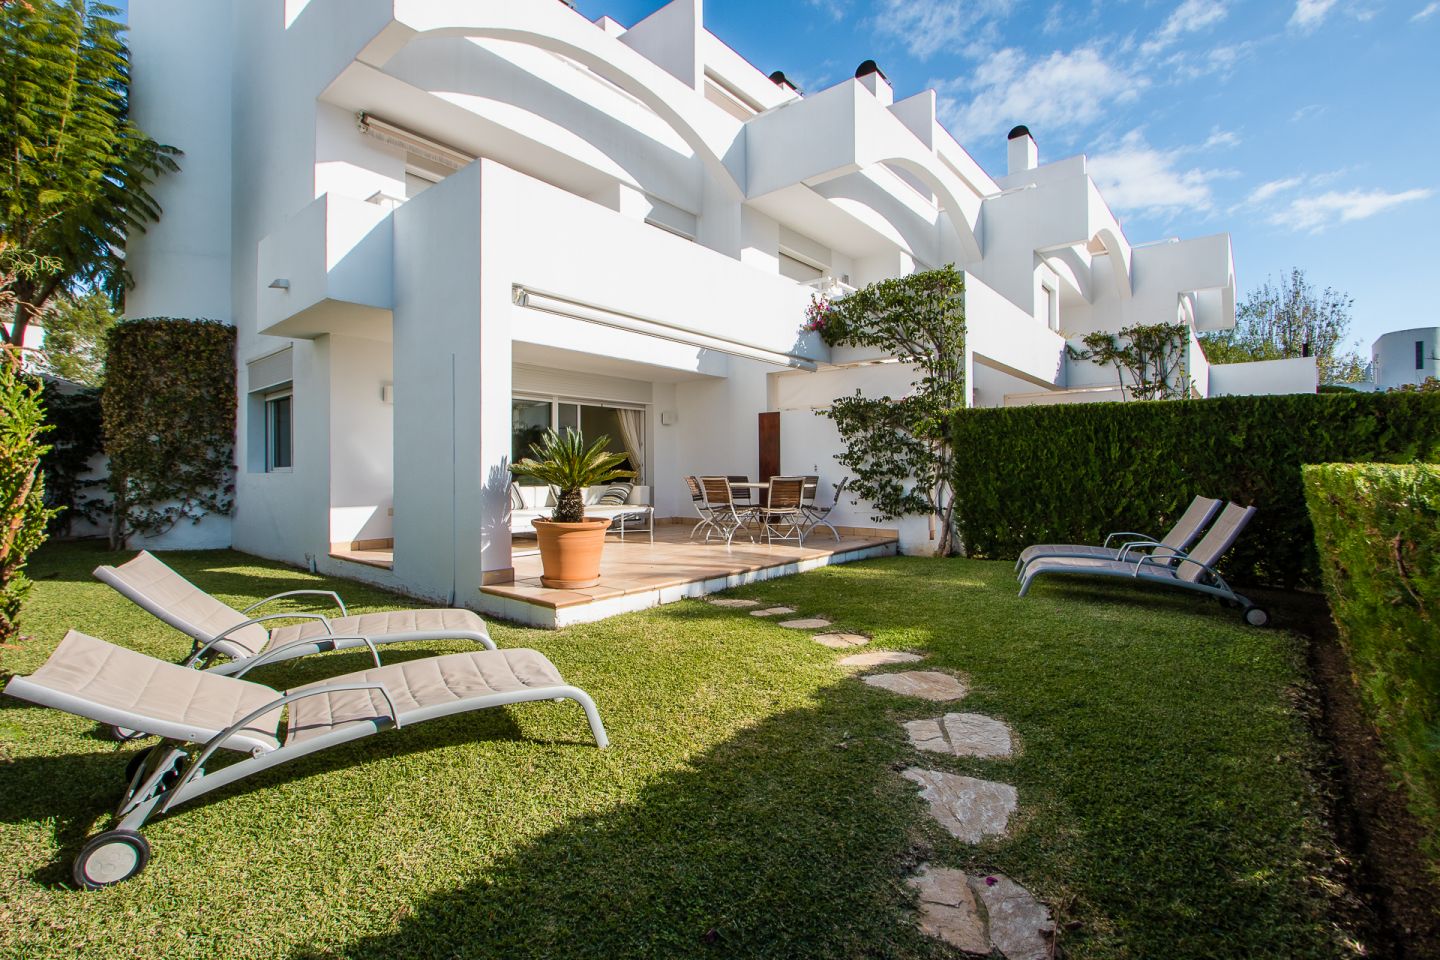 4 Bed Semidetached House for sale in PUERTO POLLENSA 1